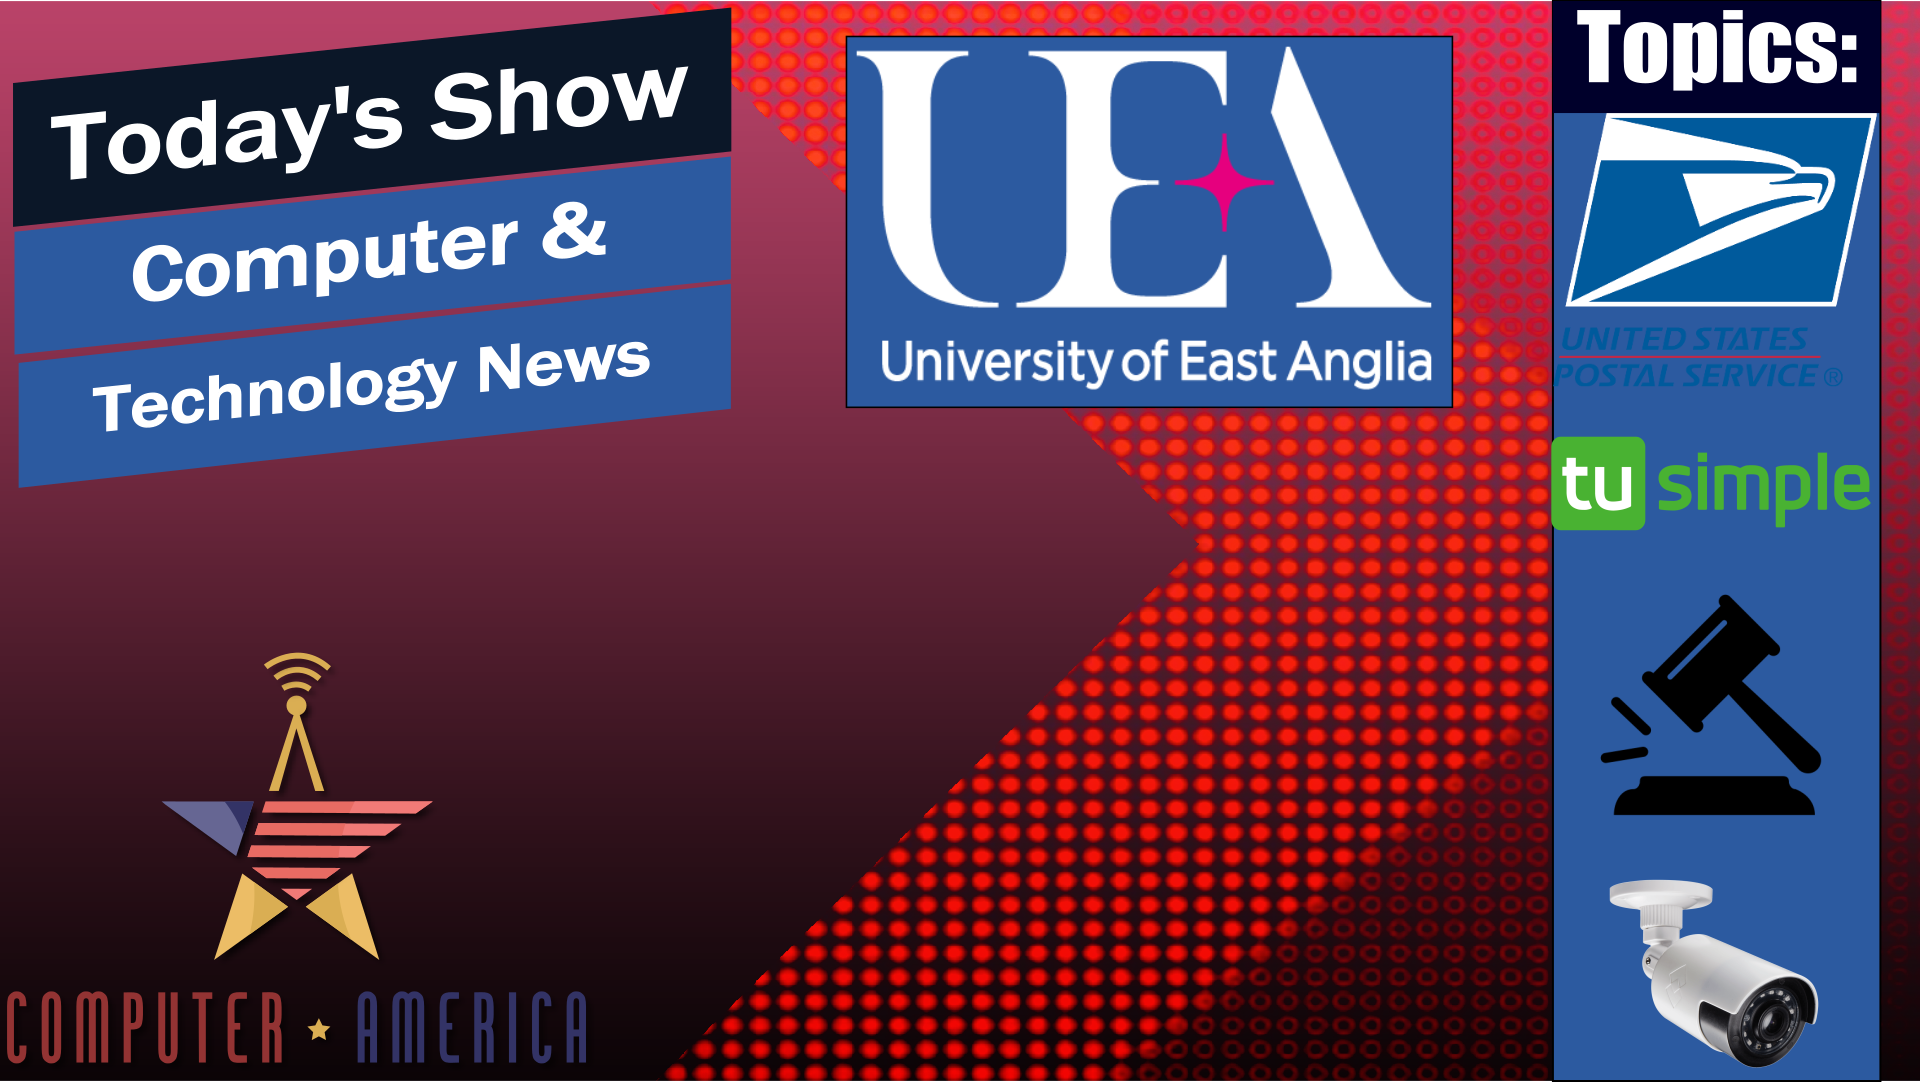 Facial Recognition Legality, University of East Anglia, And Tech News!